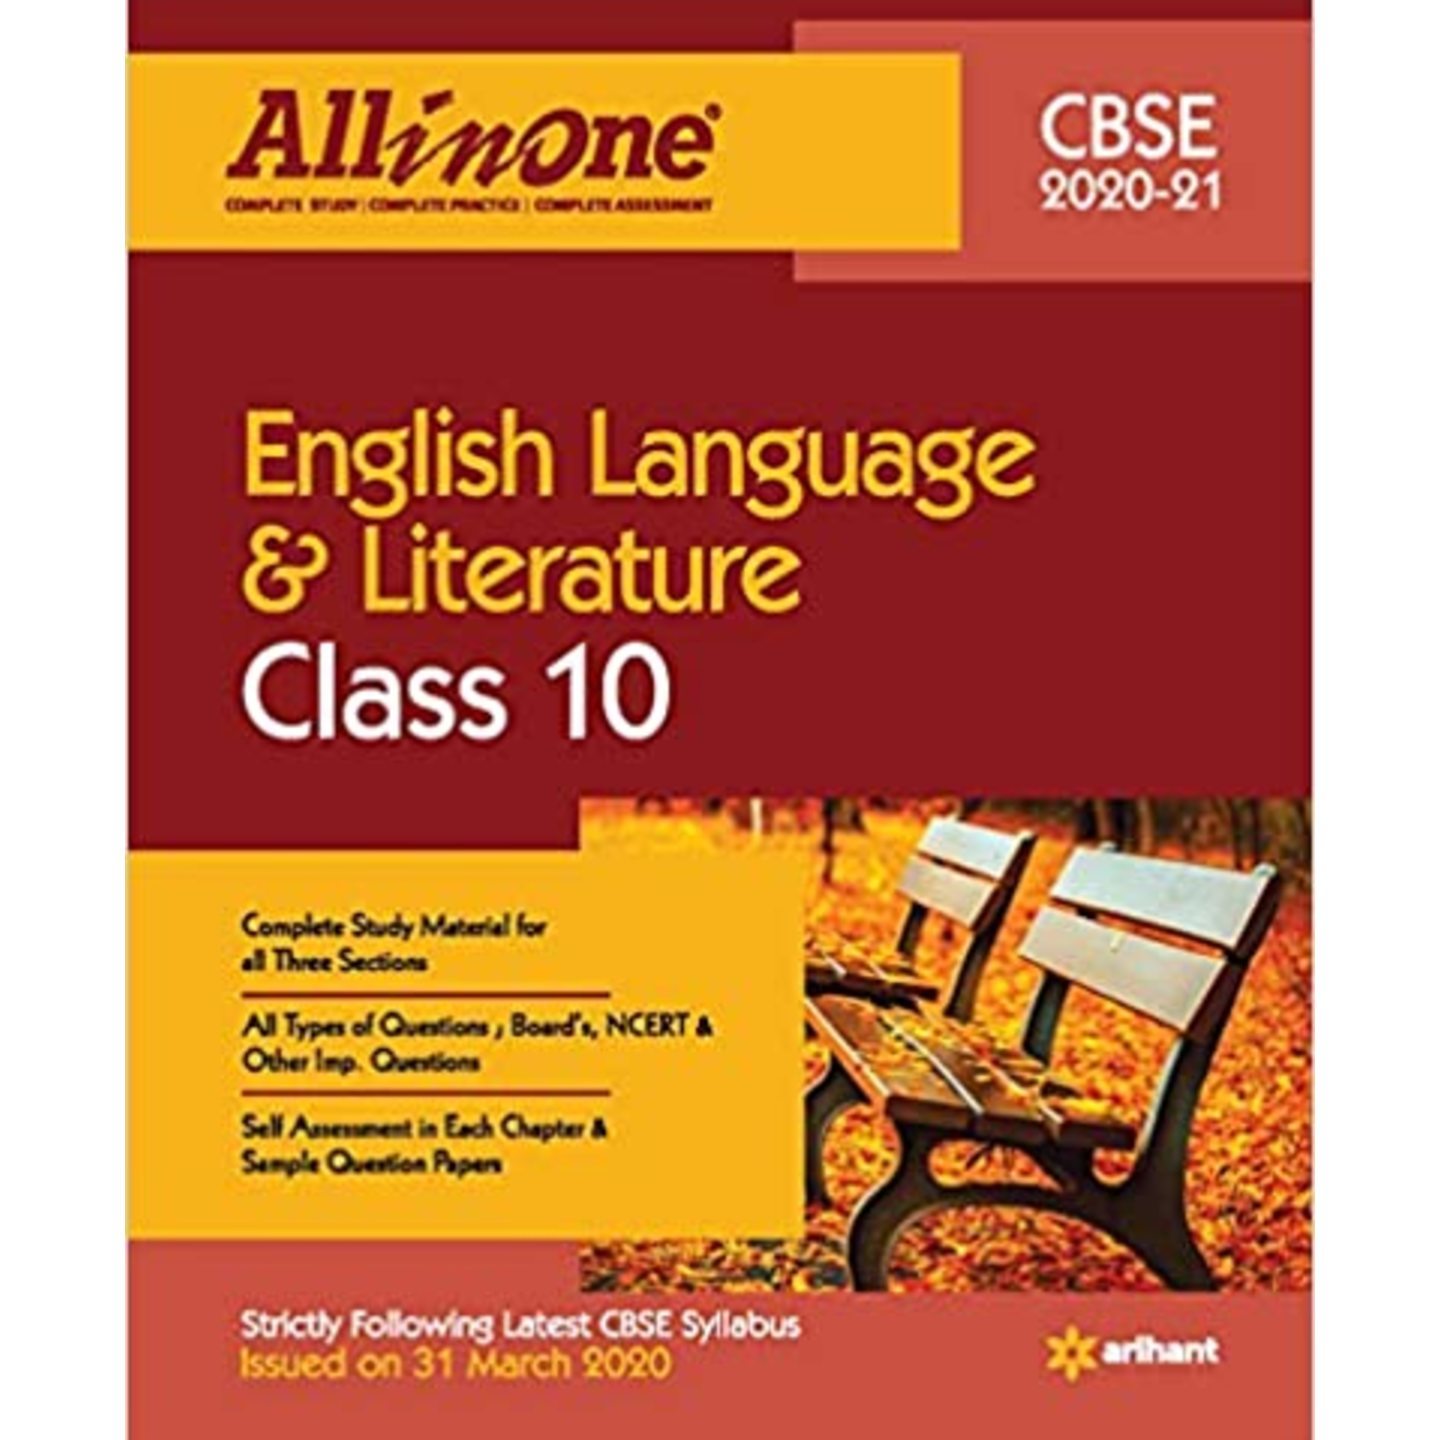 CBSE All In One English Language & Literature Class 10